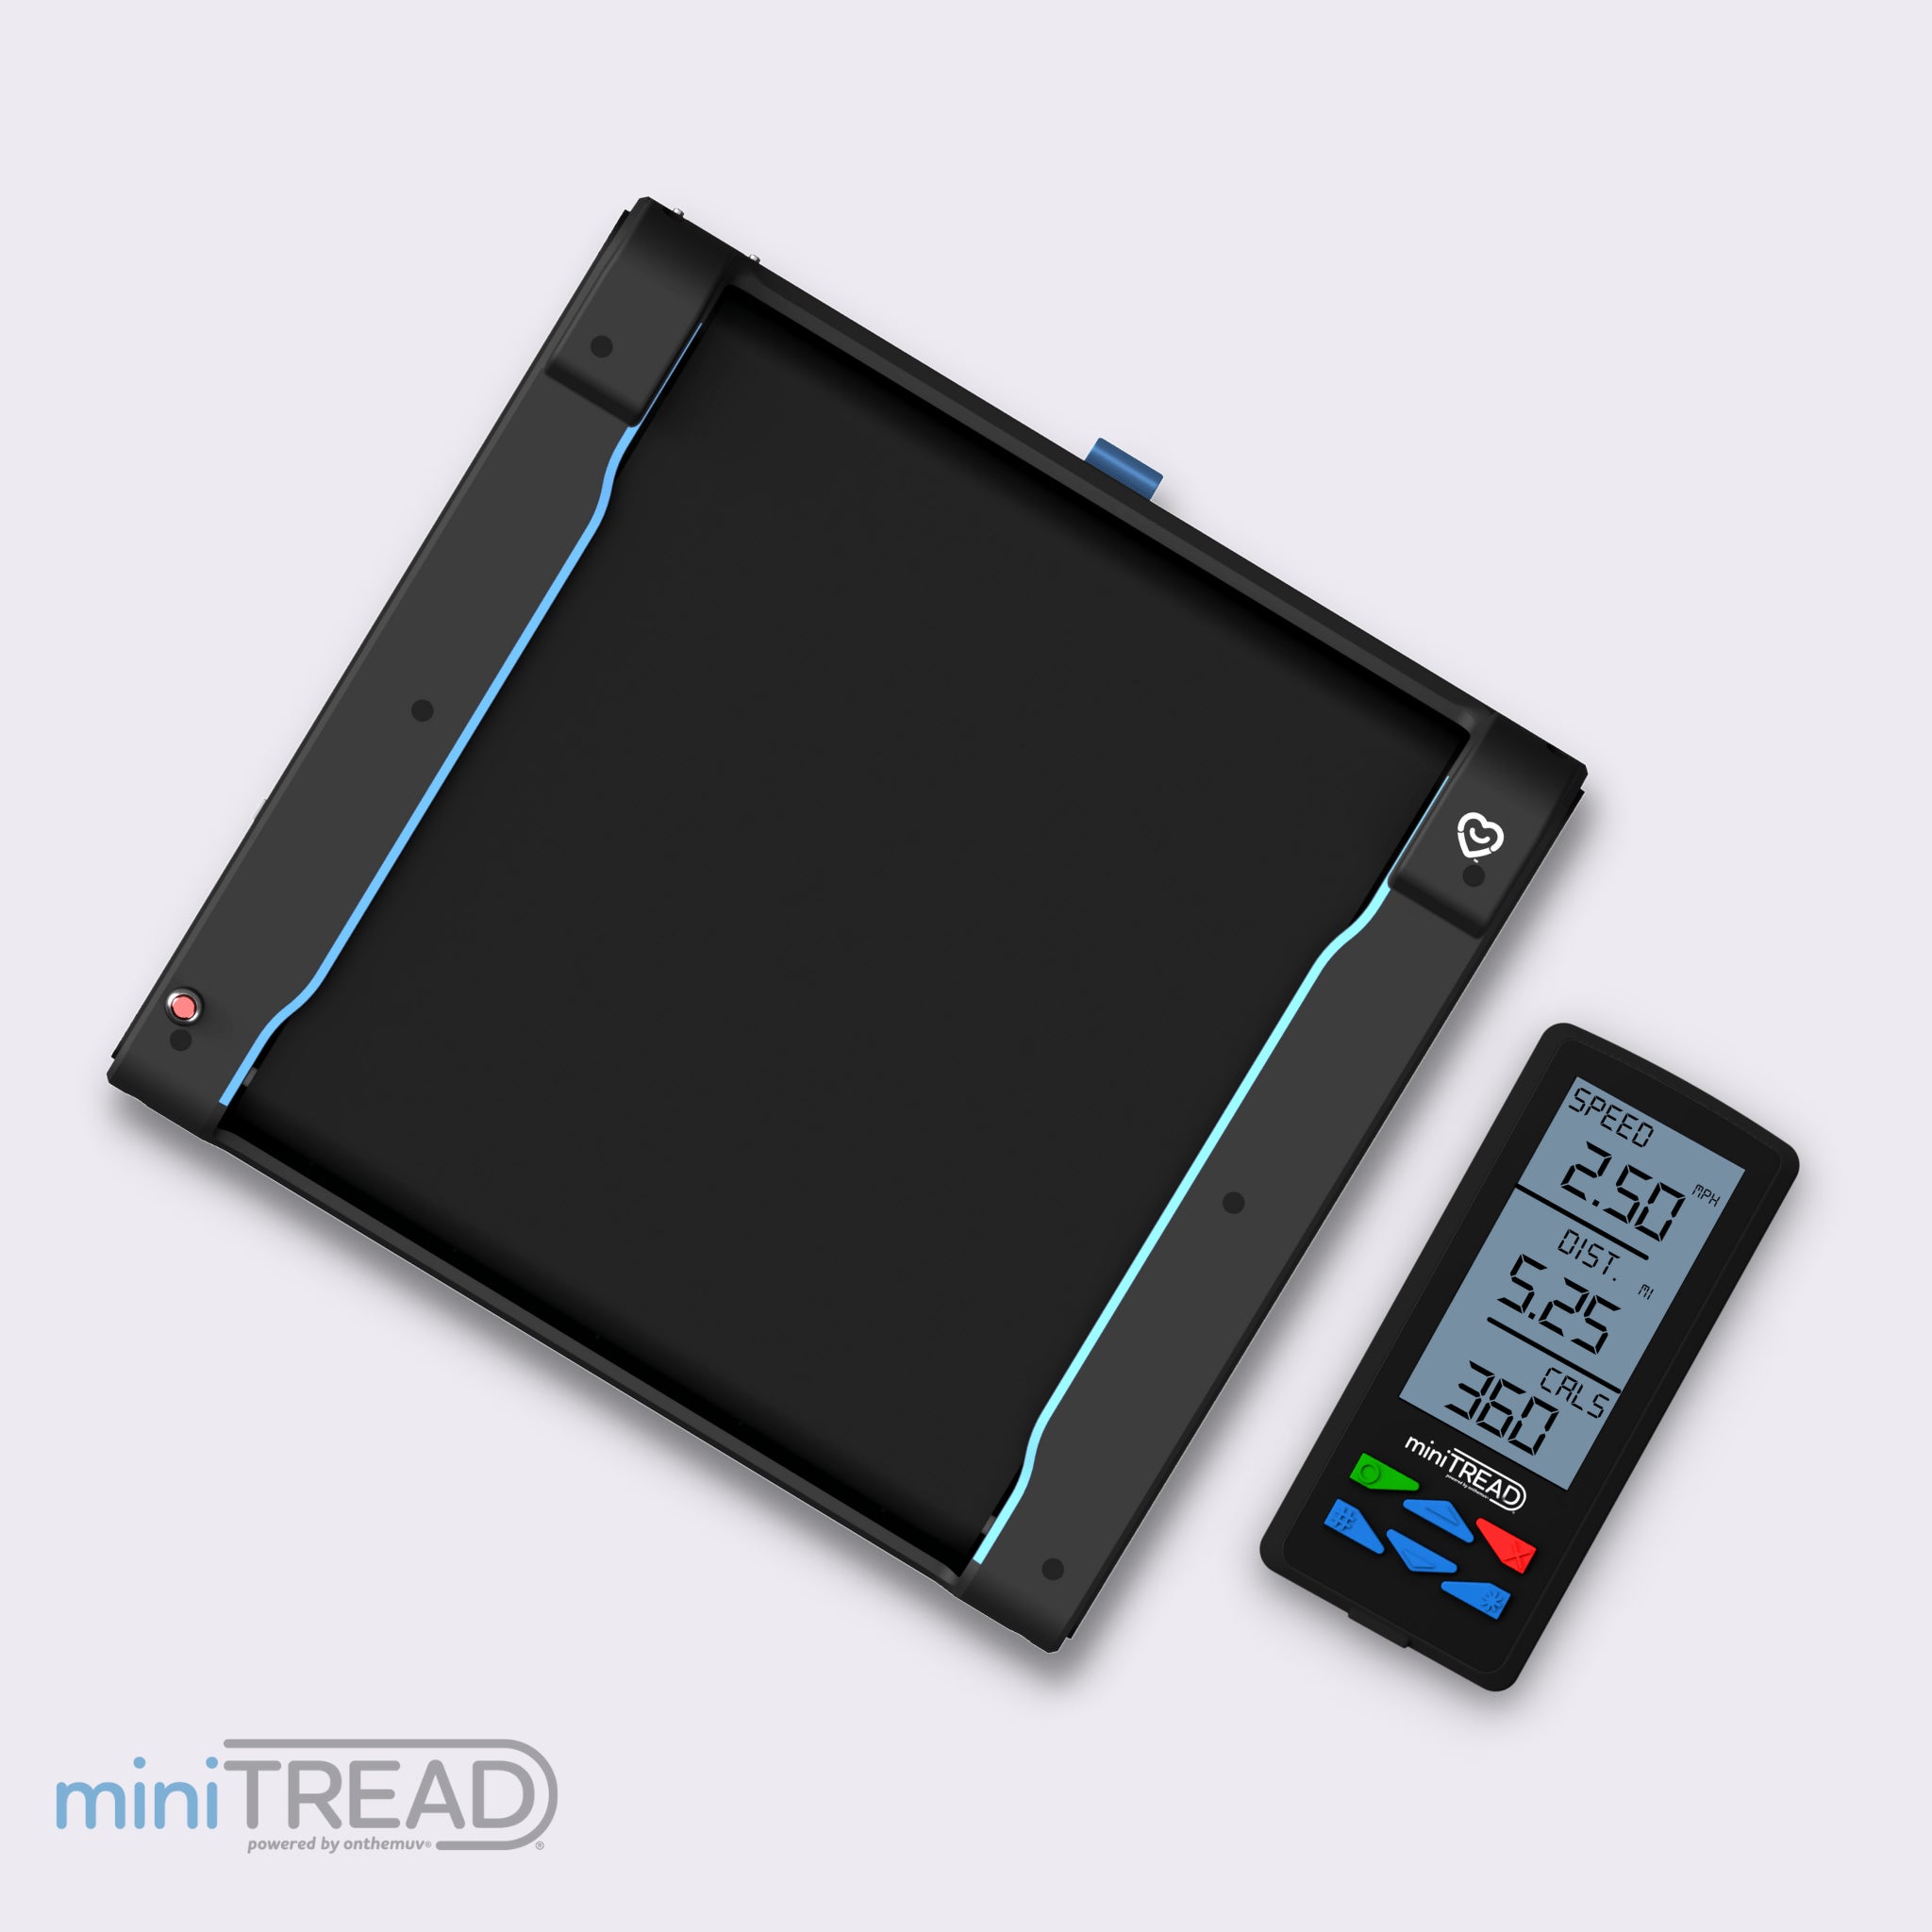 Bundle Deal: miniTREAD® ($100 off) + Free 2-Year Protection Plan